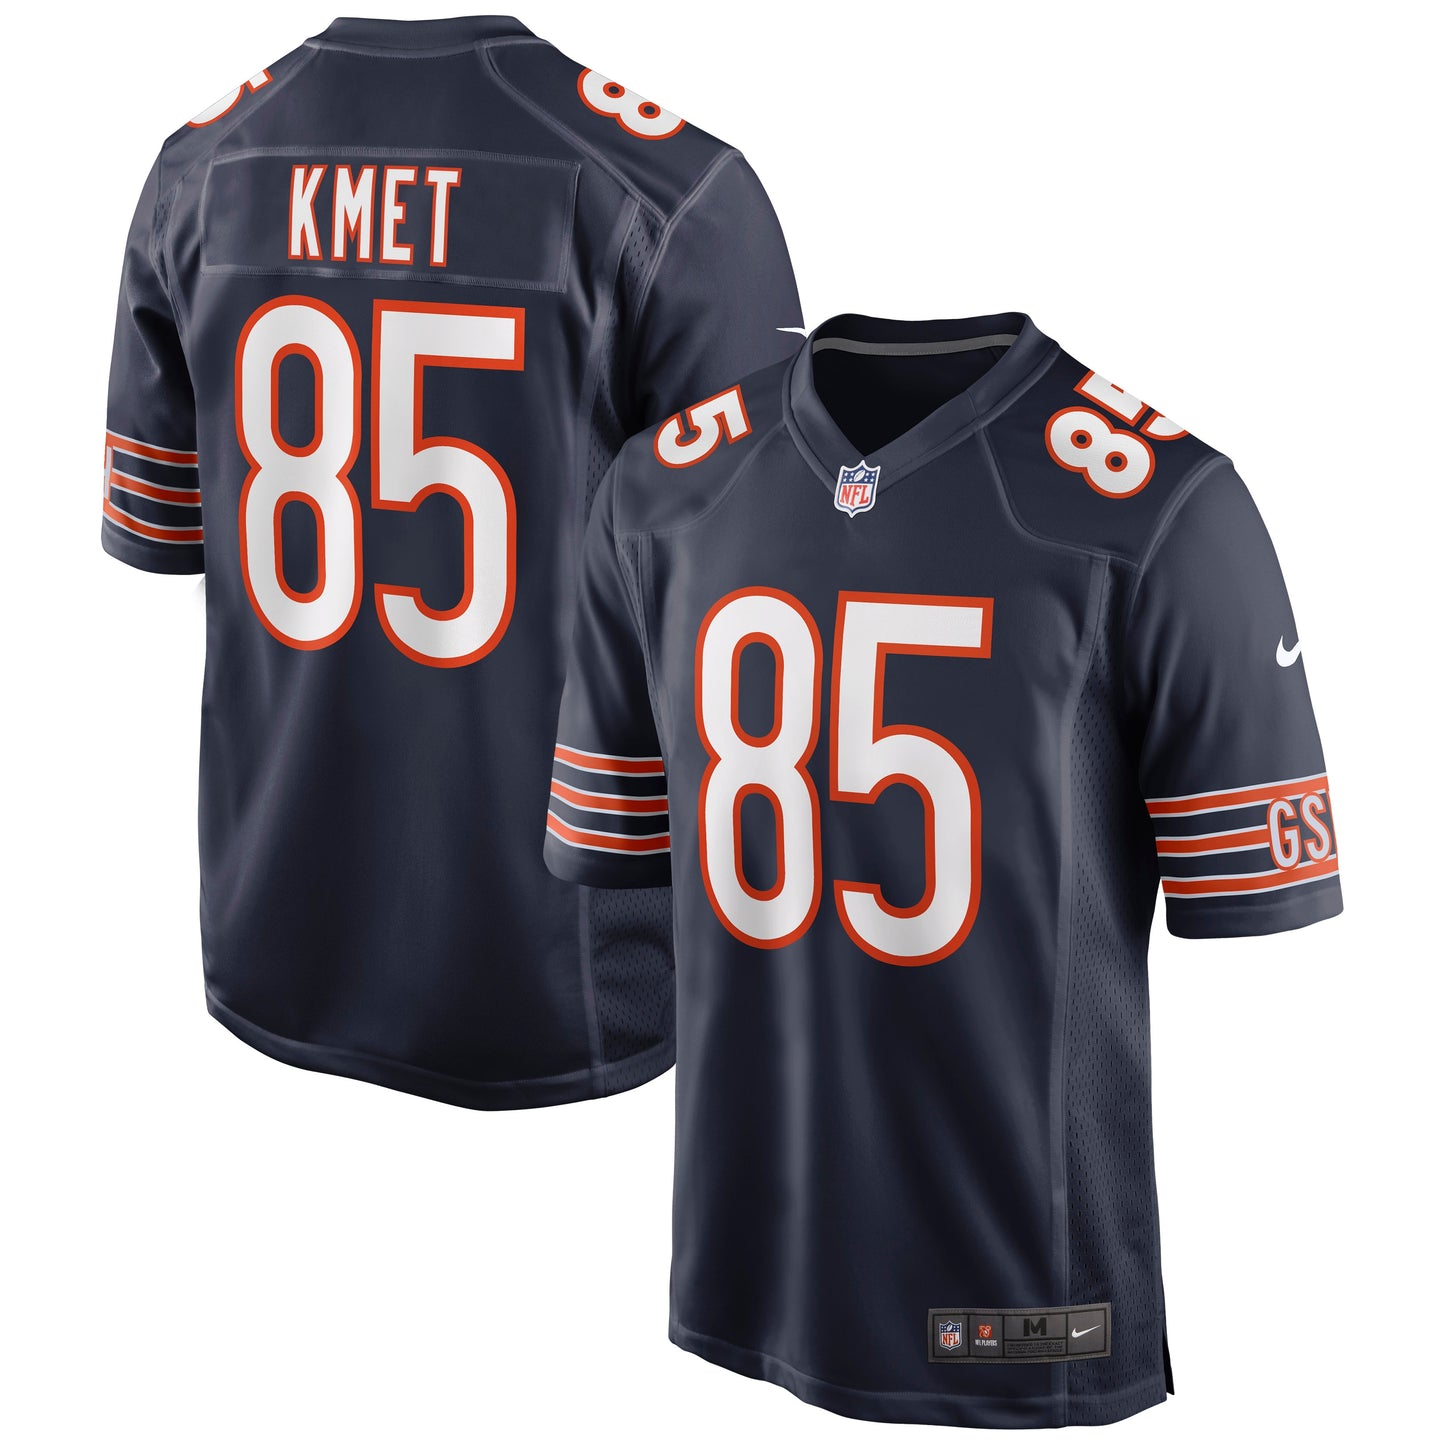 Cole Kmet Chicago Bears Nike Player Game Jersey - Navy